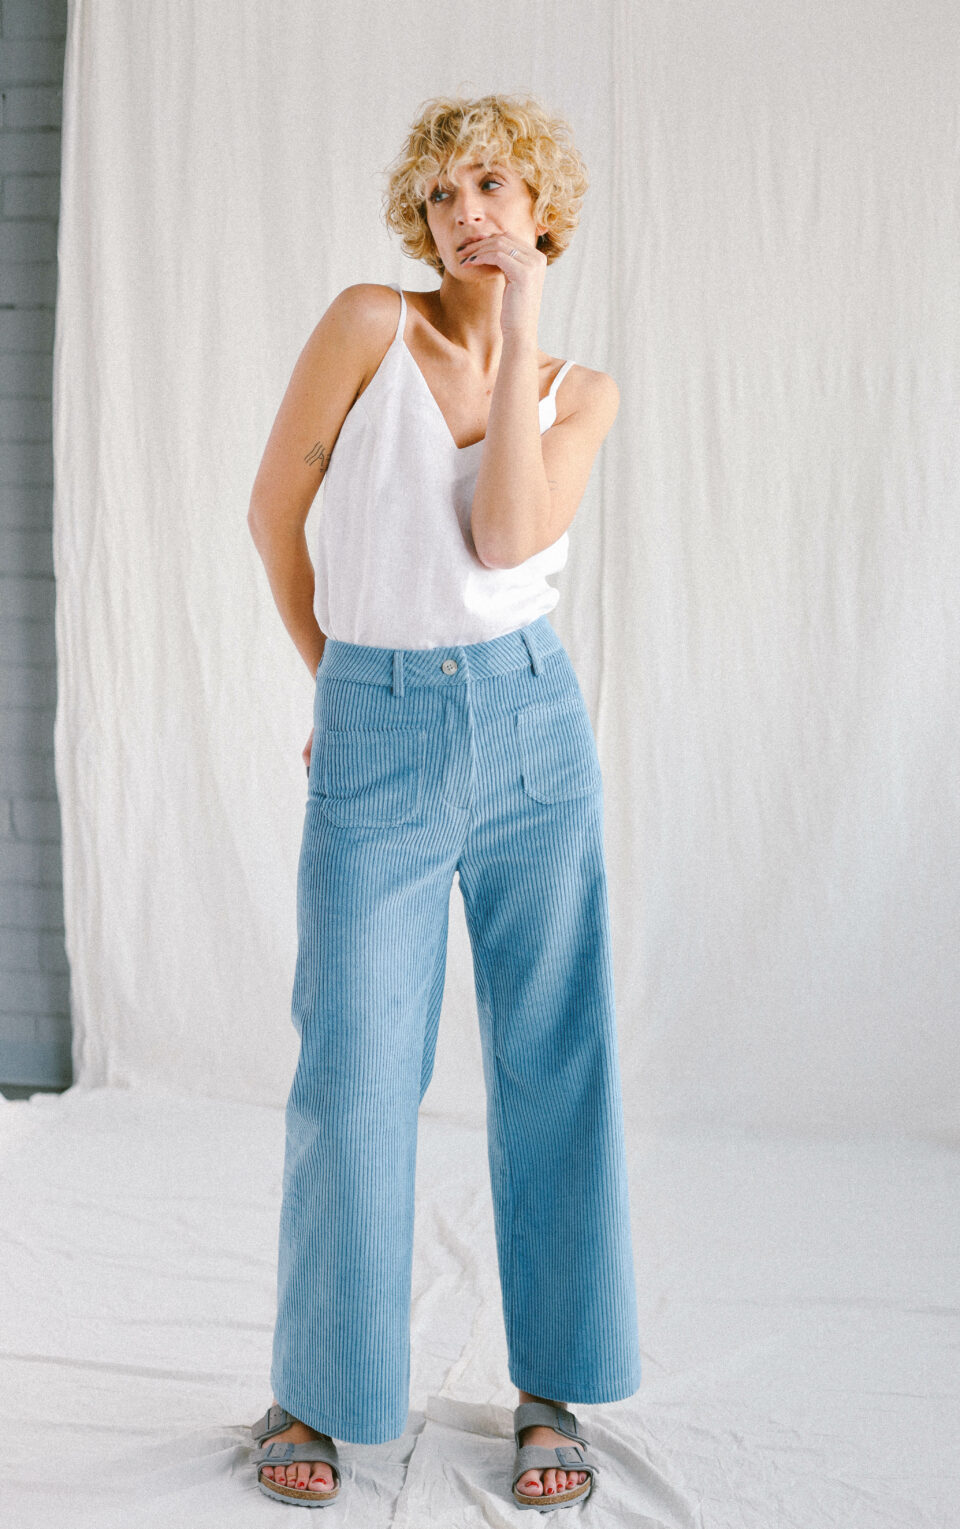 White linen loose fit slip top | Tops | White | Sustainable clothing | OffOn clothing